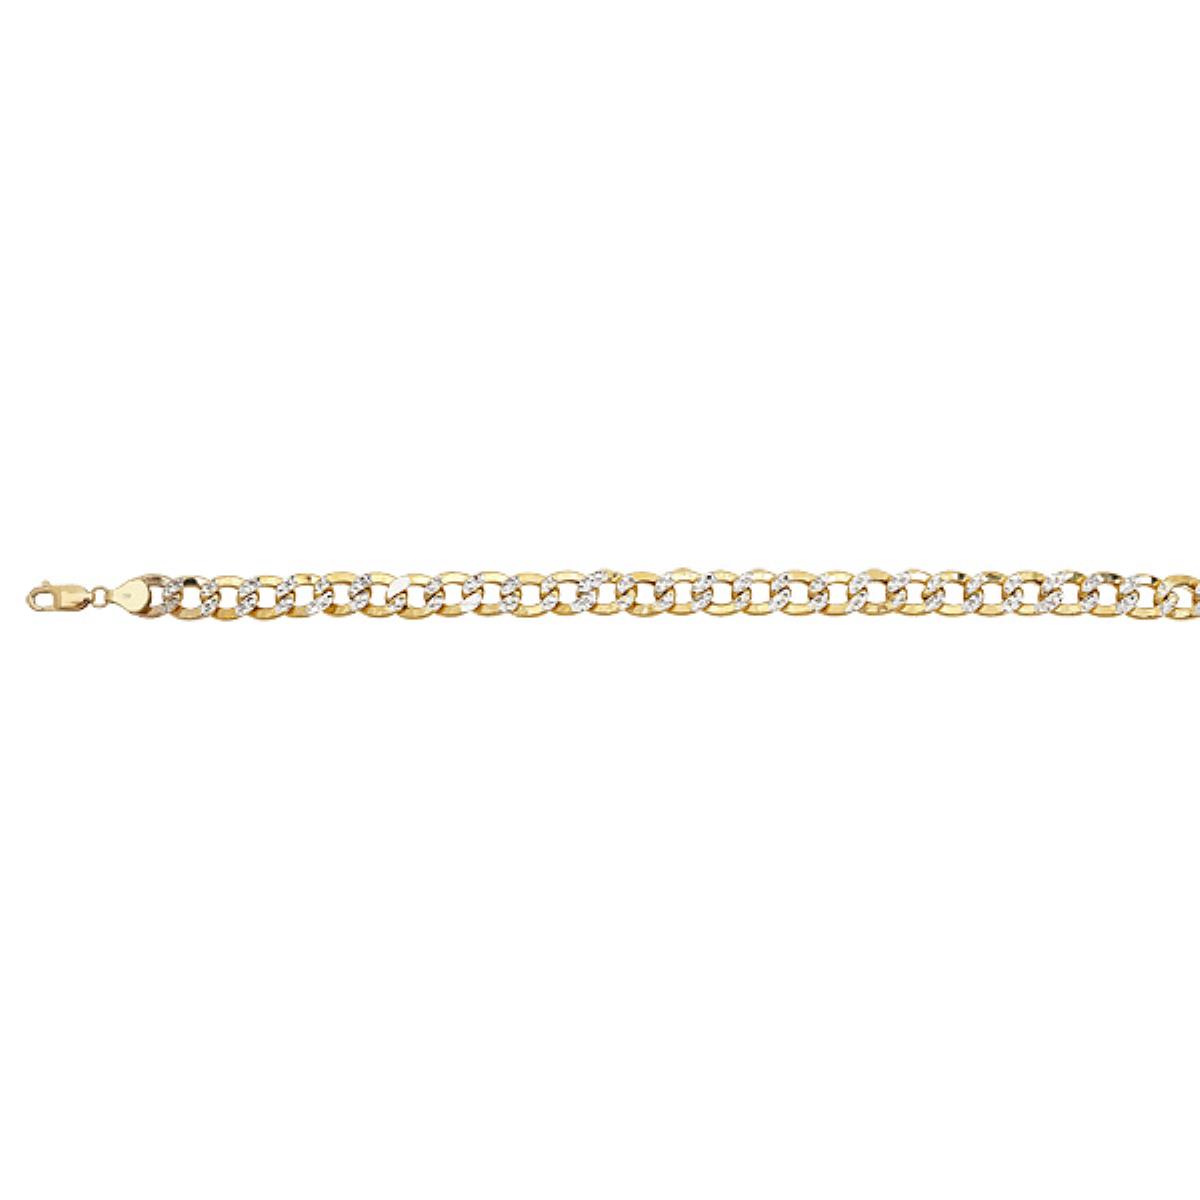 10K Yellow Gold 250 Hollow Cuban White Pave 26" Chain